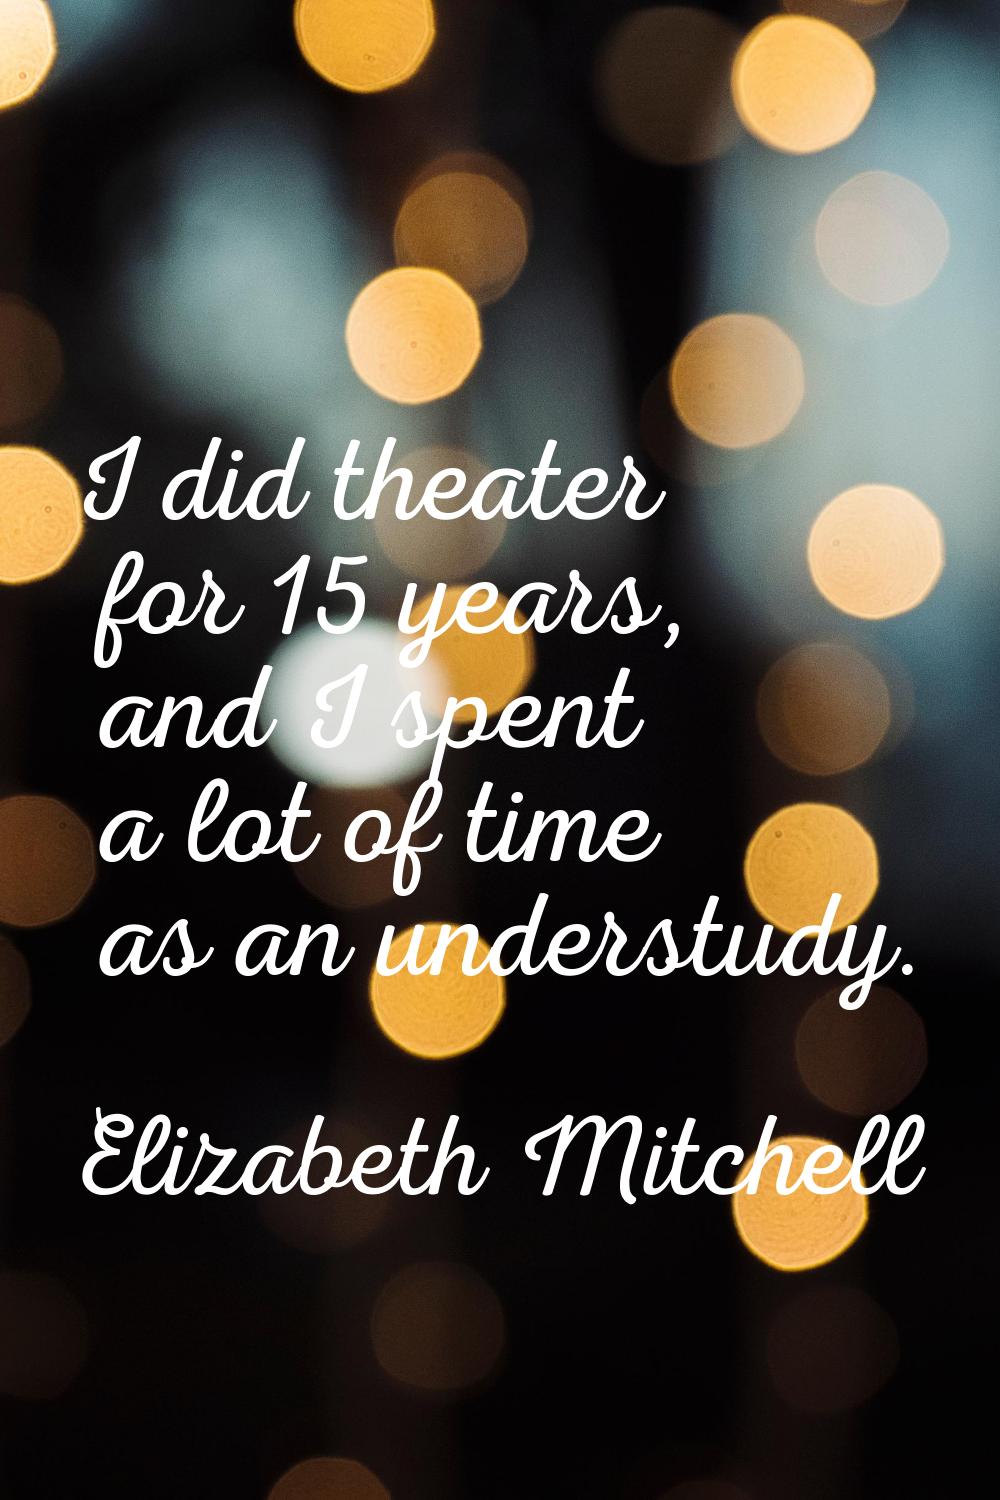 I did theater for 15 years, and I spent a lot of time as an understudy.